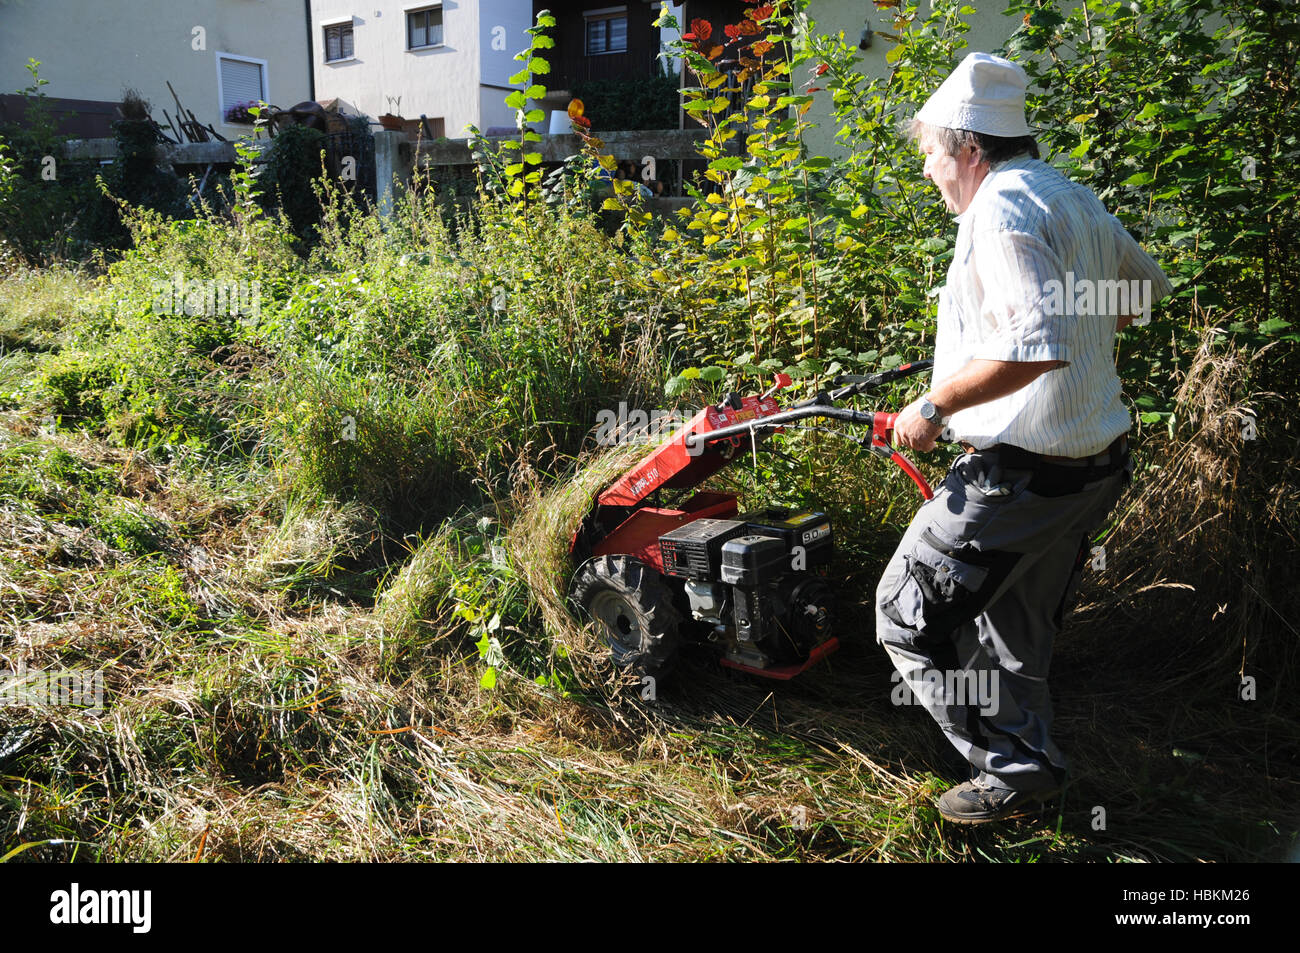 meadow mowing with sickle bar mower Stock Photo